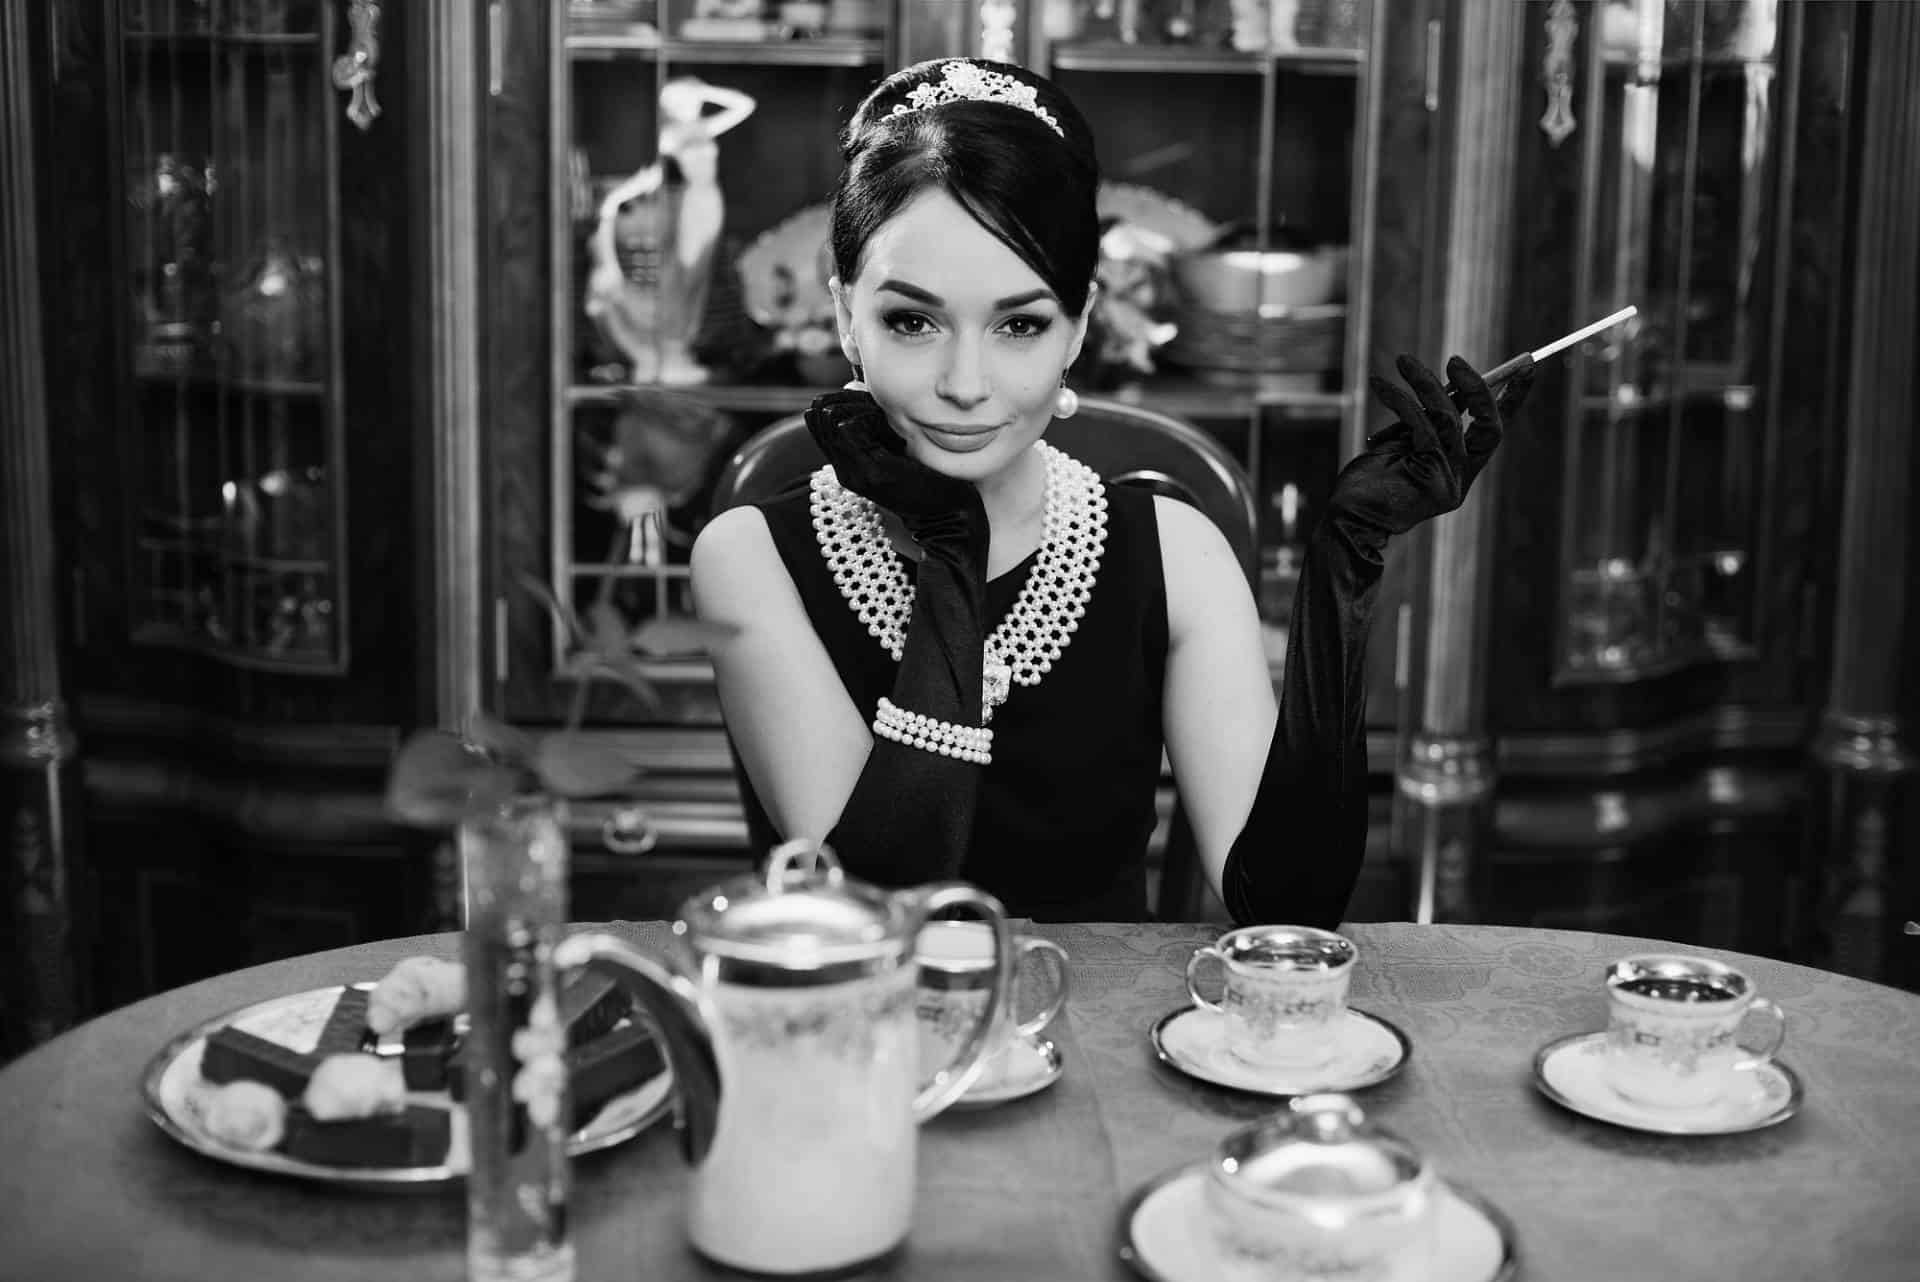 Black and white picture of girl that looks like Audrey Hepburn sitting at the dinner table